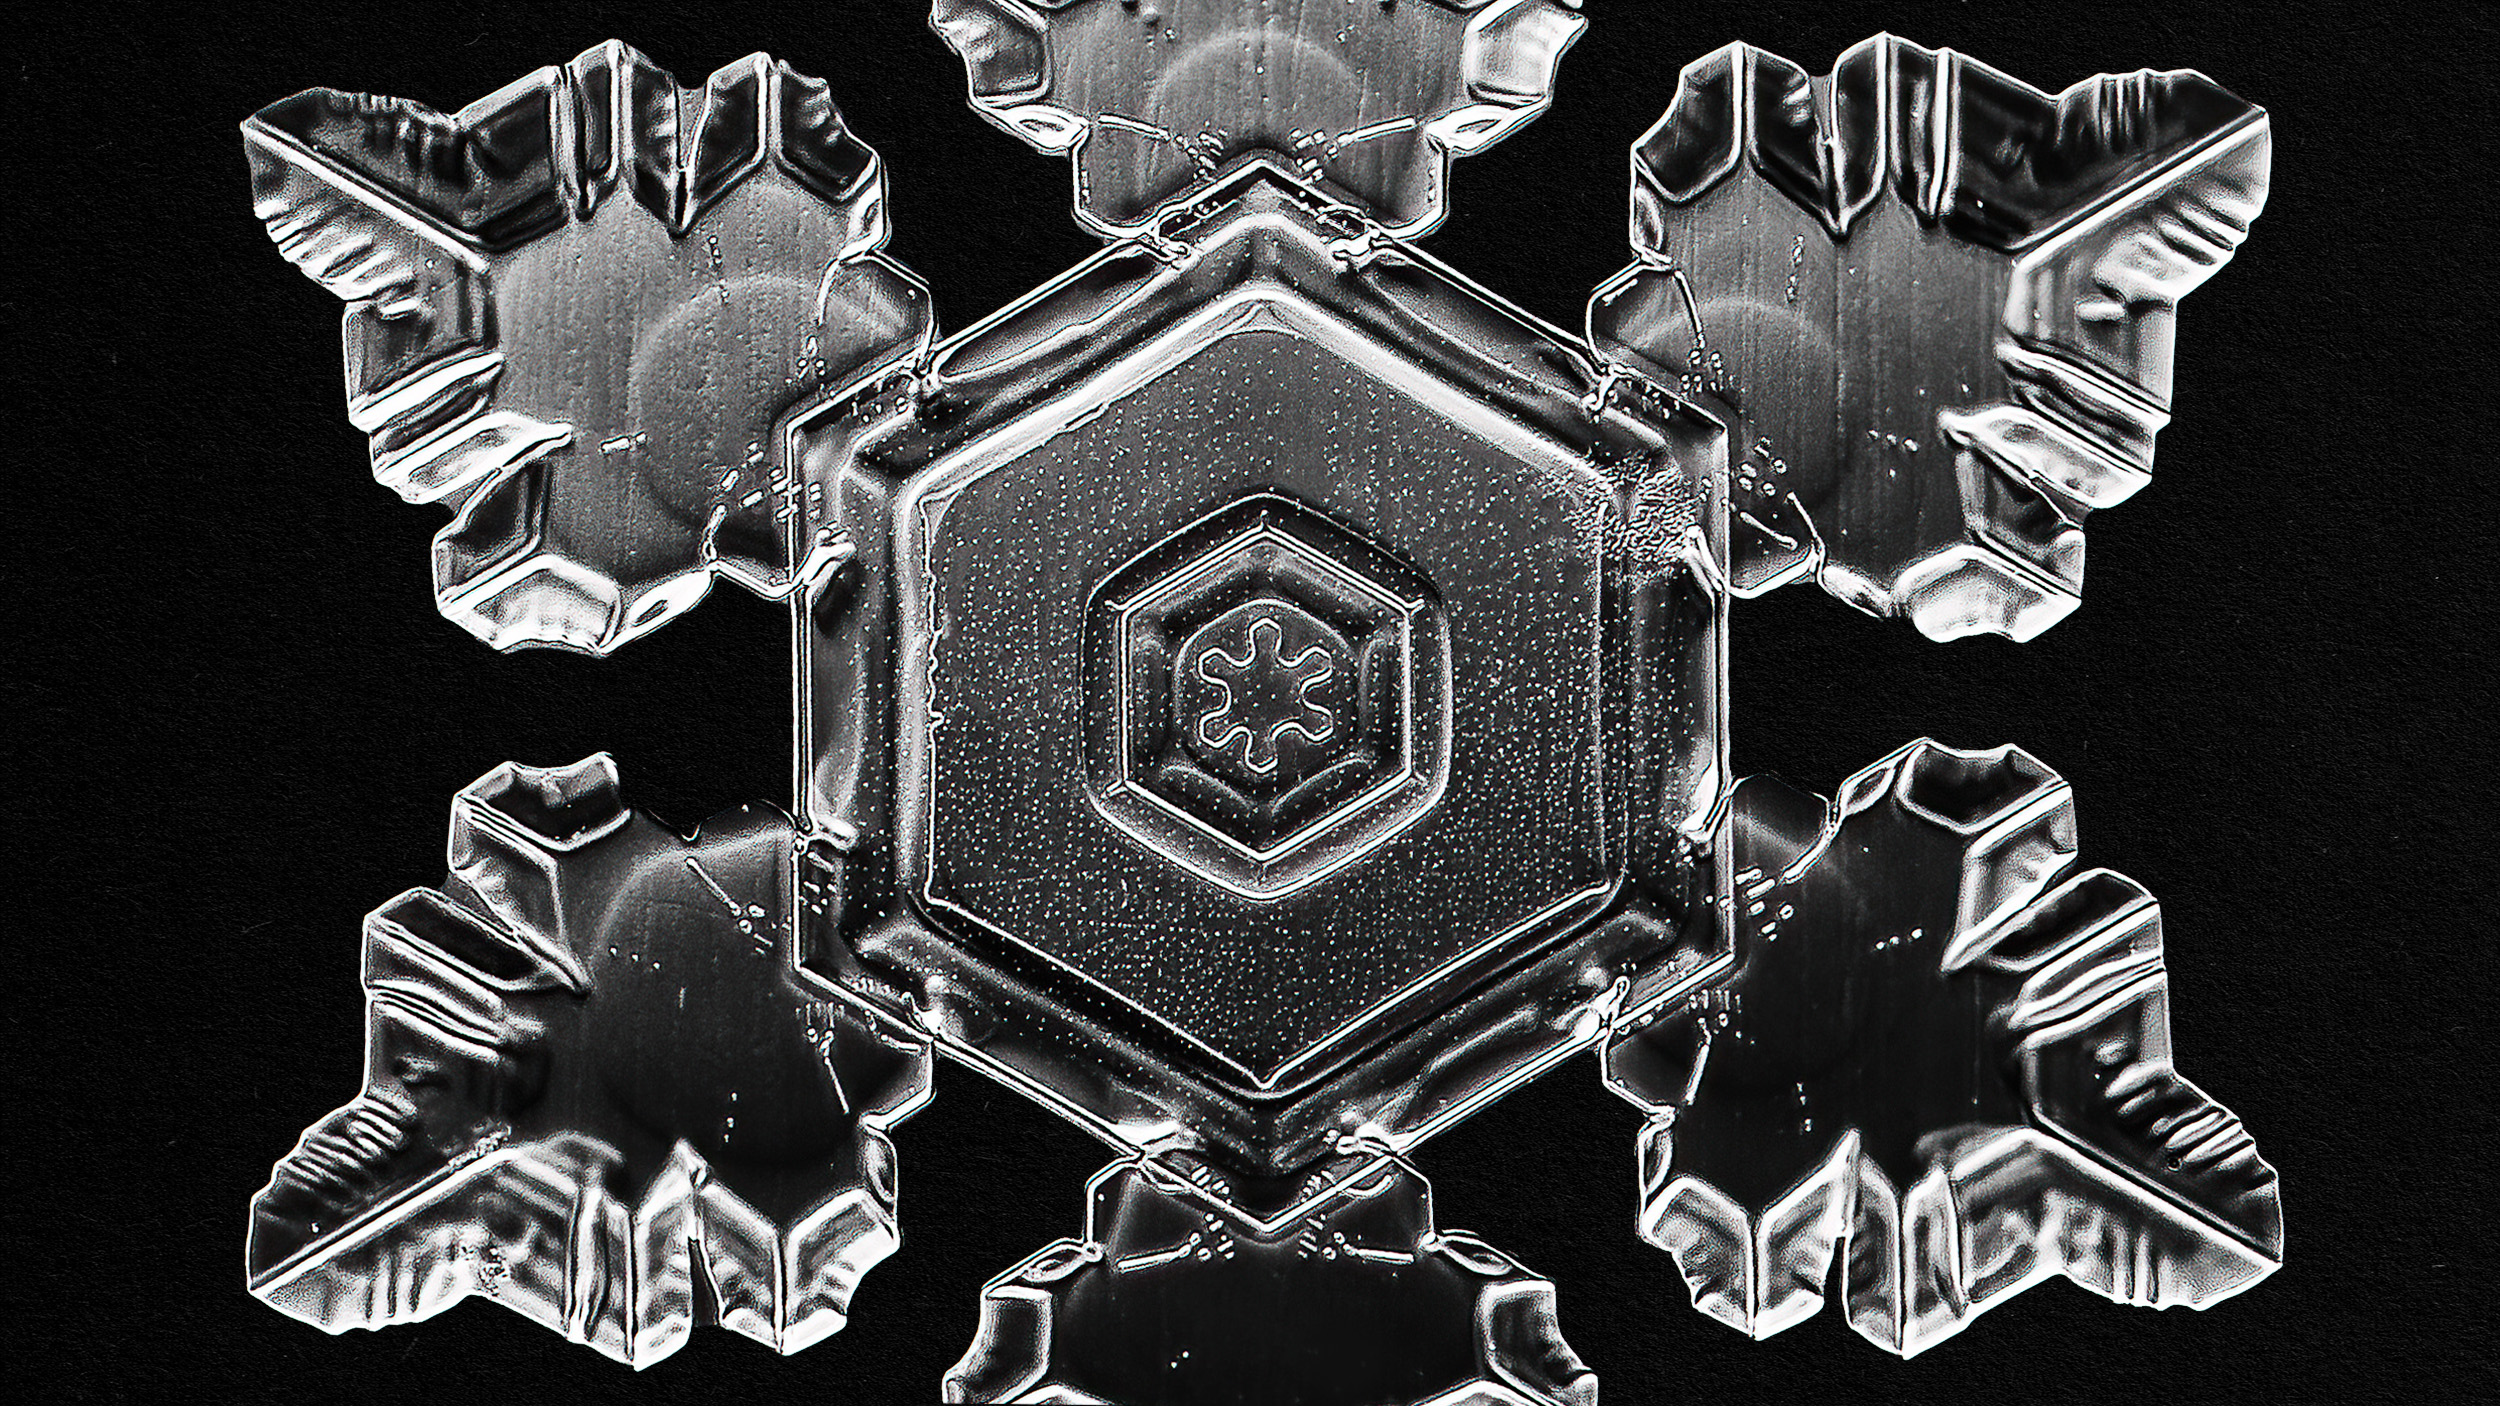 An image of a snowflake on a black background, showcasing its scientific intricacies and ethereal beauty.